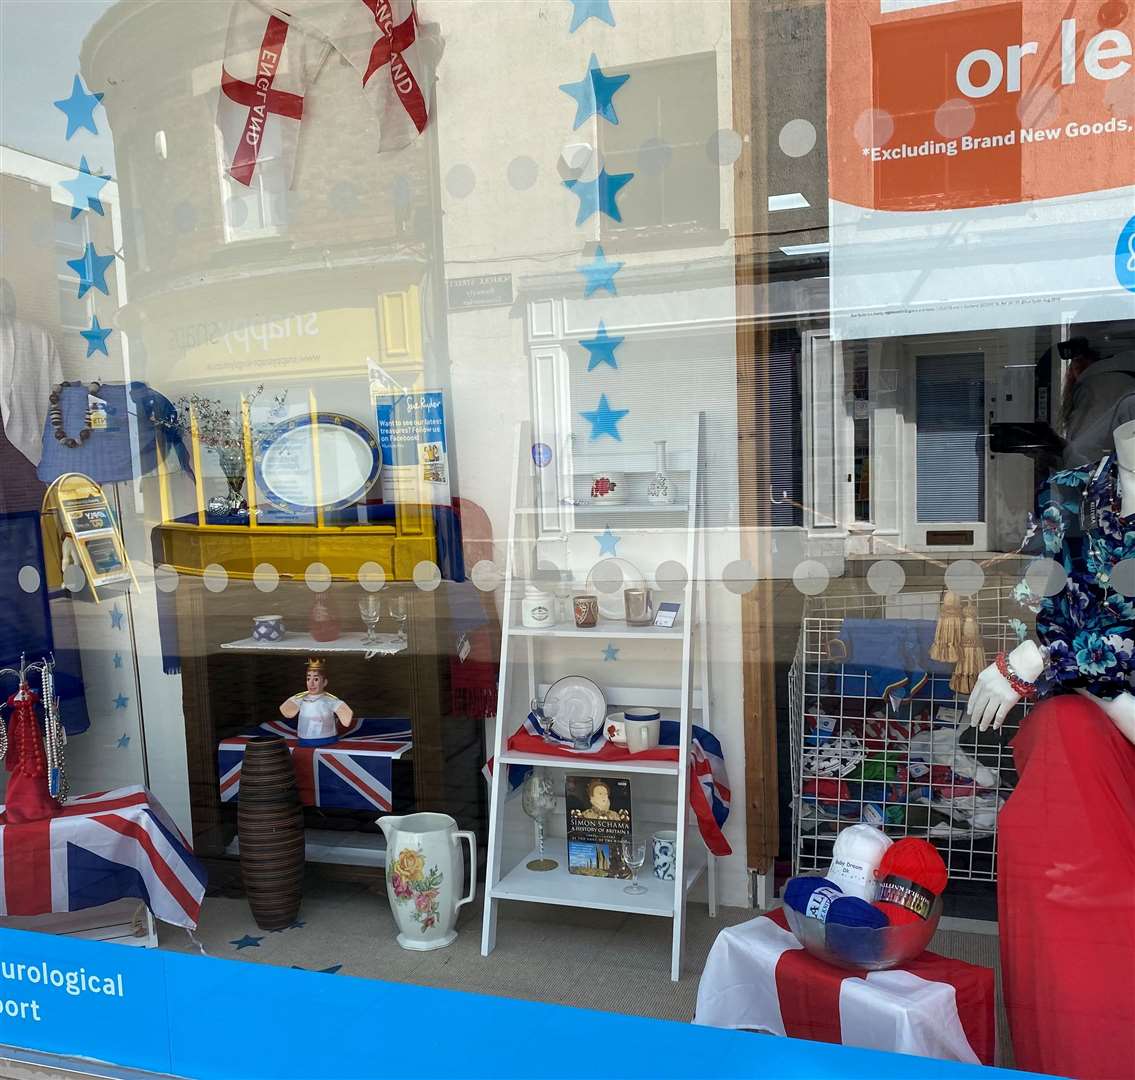 Sue Ryder created this display for the Coronation